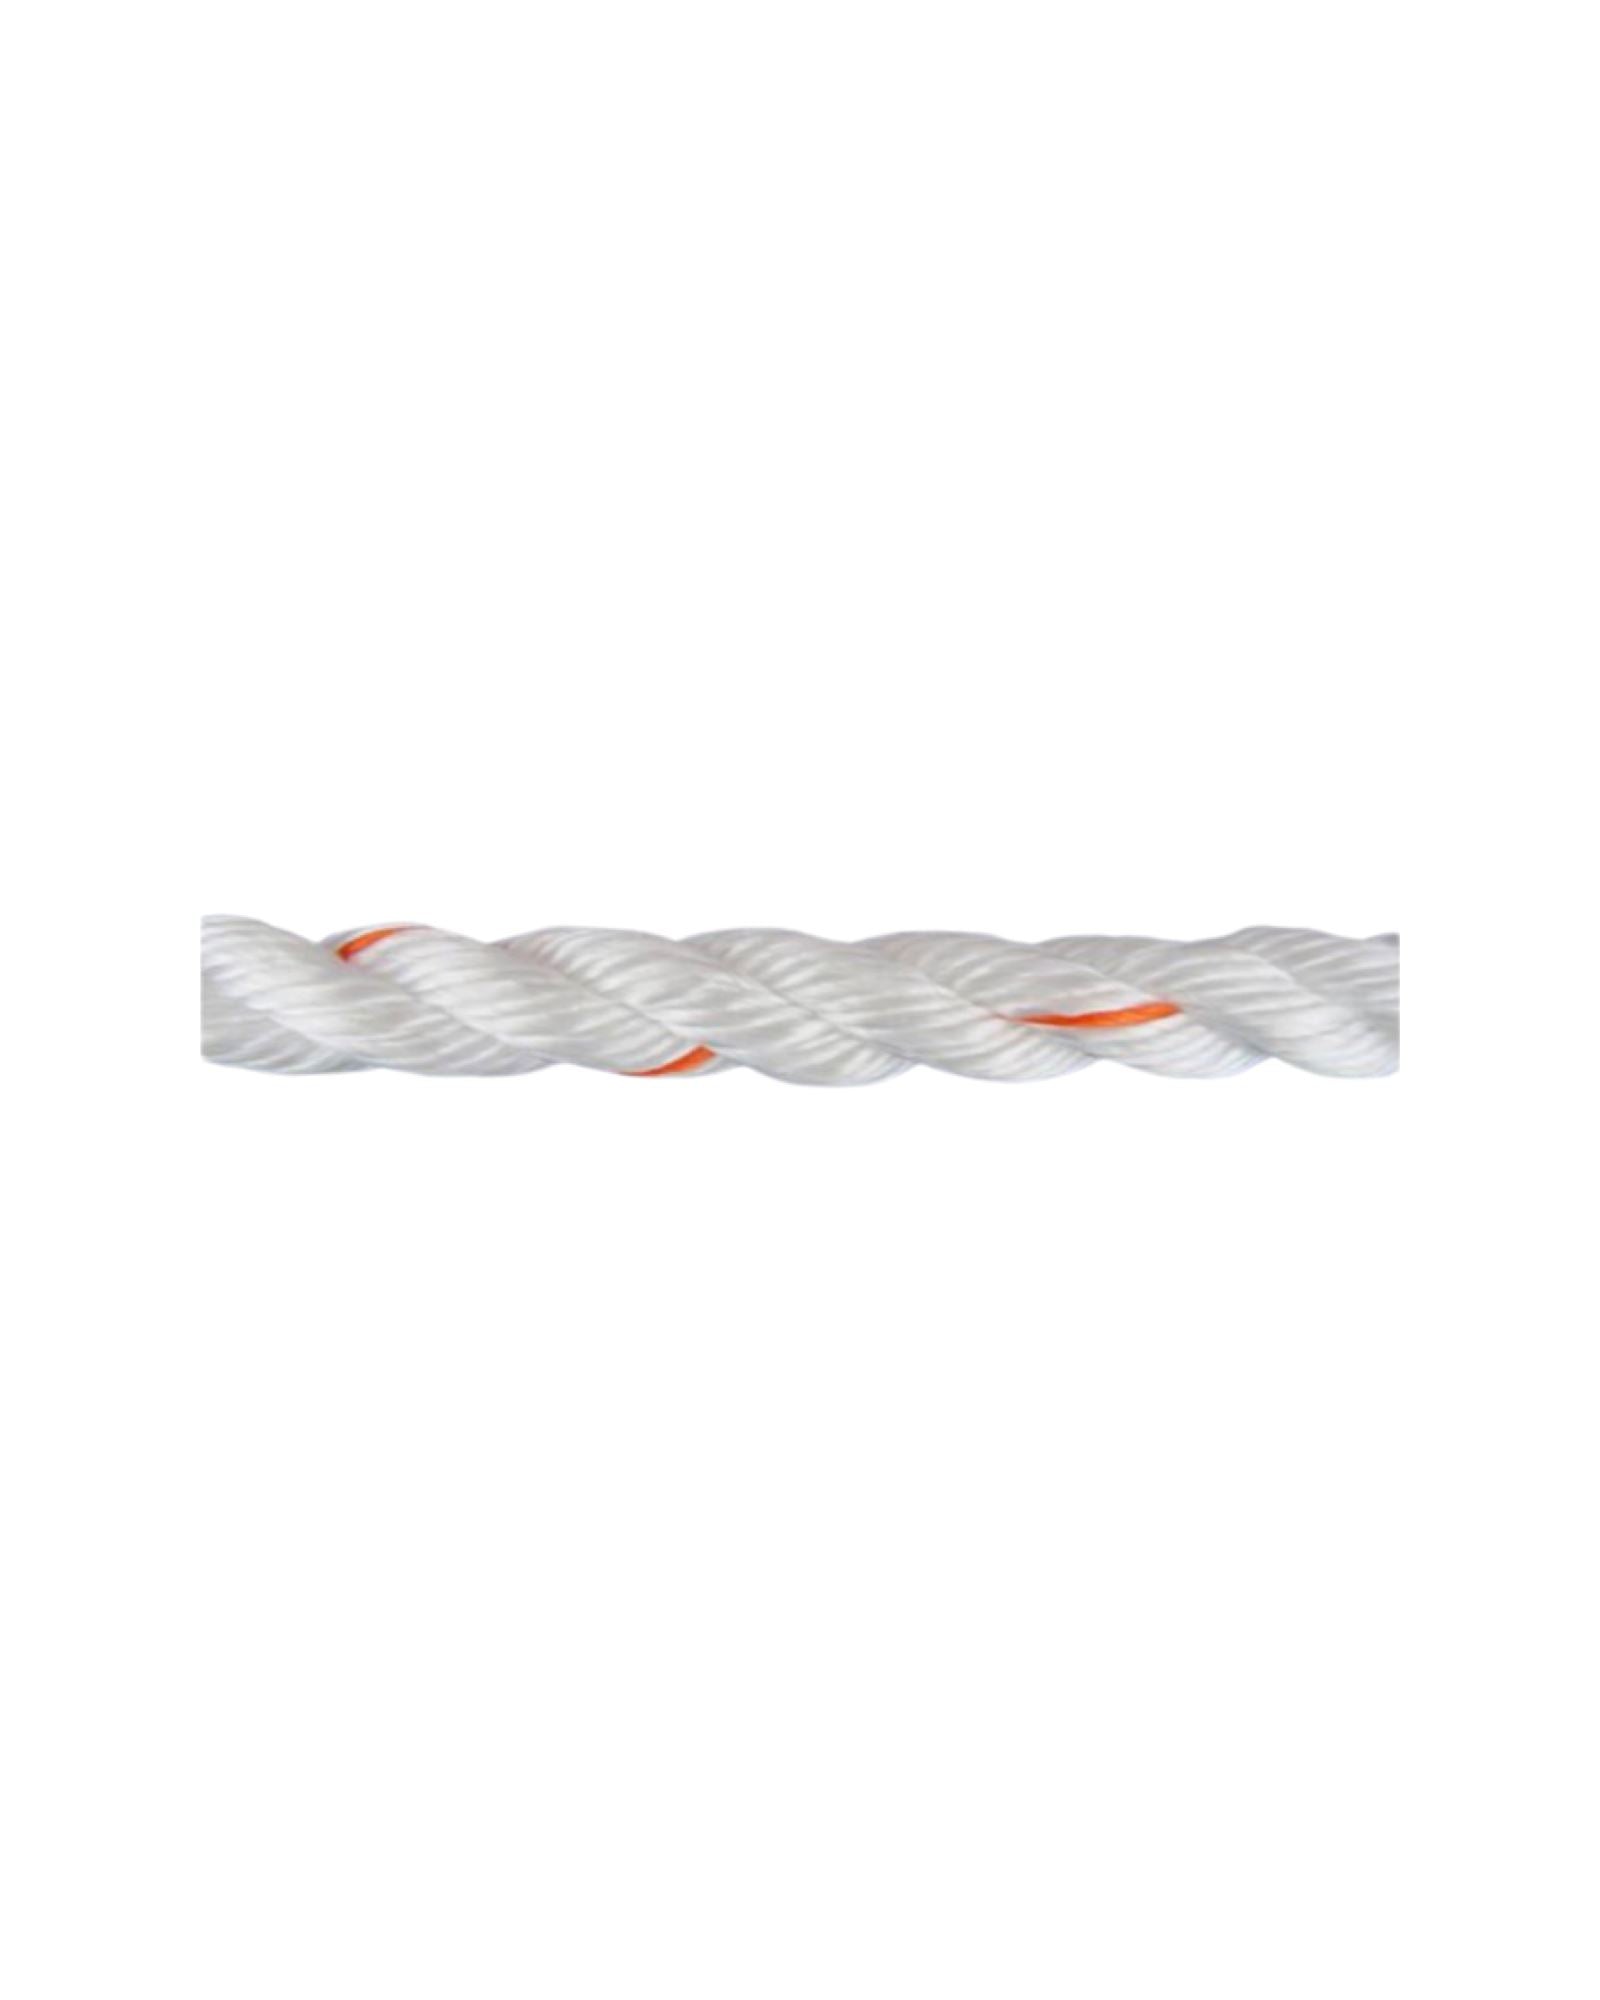 Aamstrand 5/8" 3 Strand Poly-Dac Rope - 14149 Ropes Aamstrand 